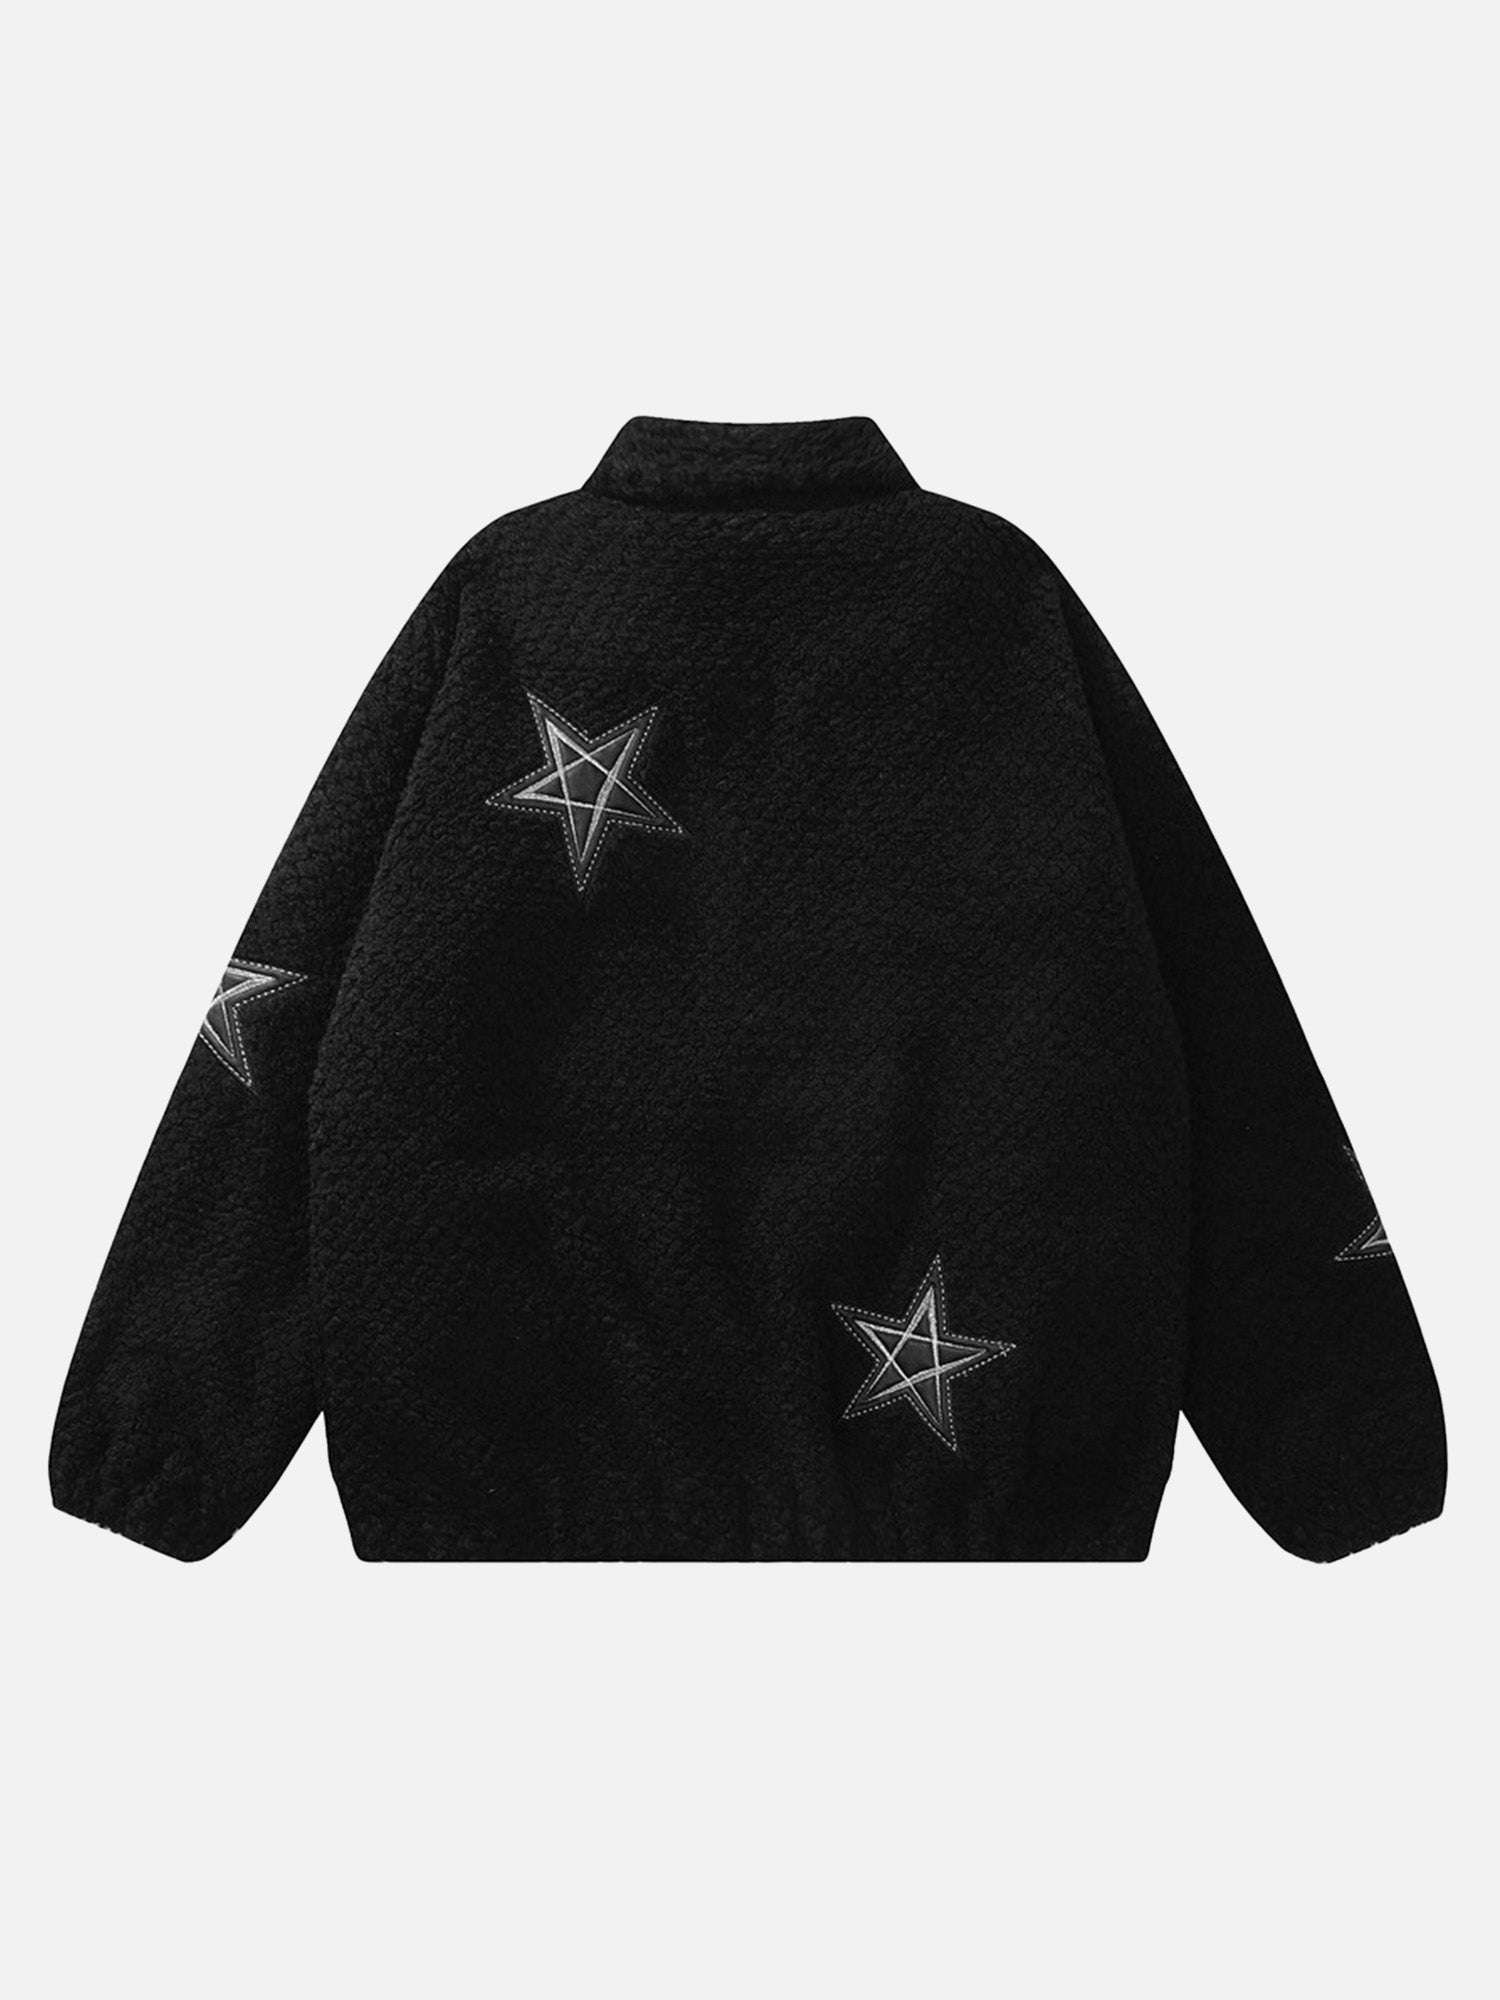 Thesupermade Embroidered Five-pointed Star Design Lambswool Cotton Jacket